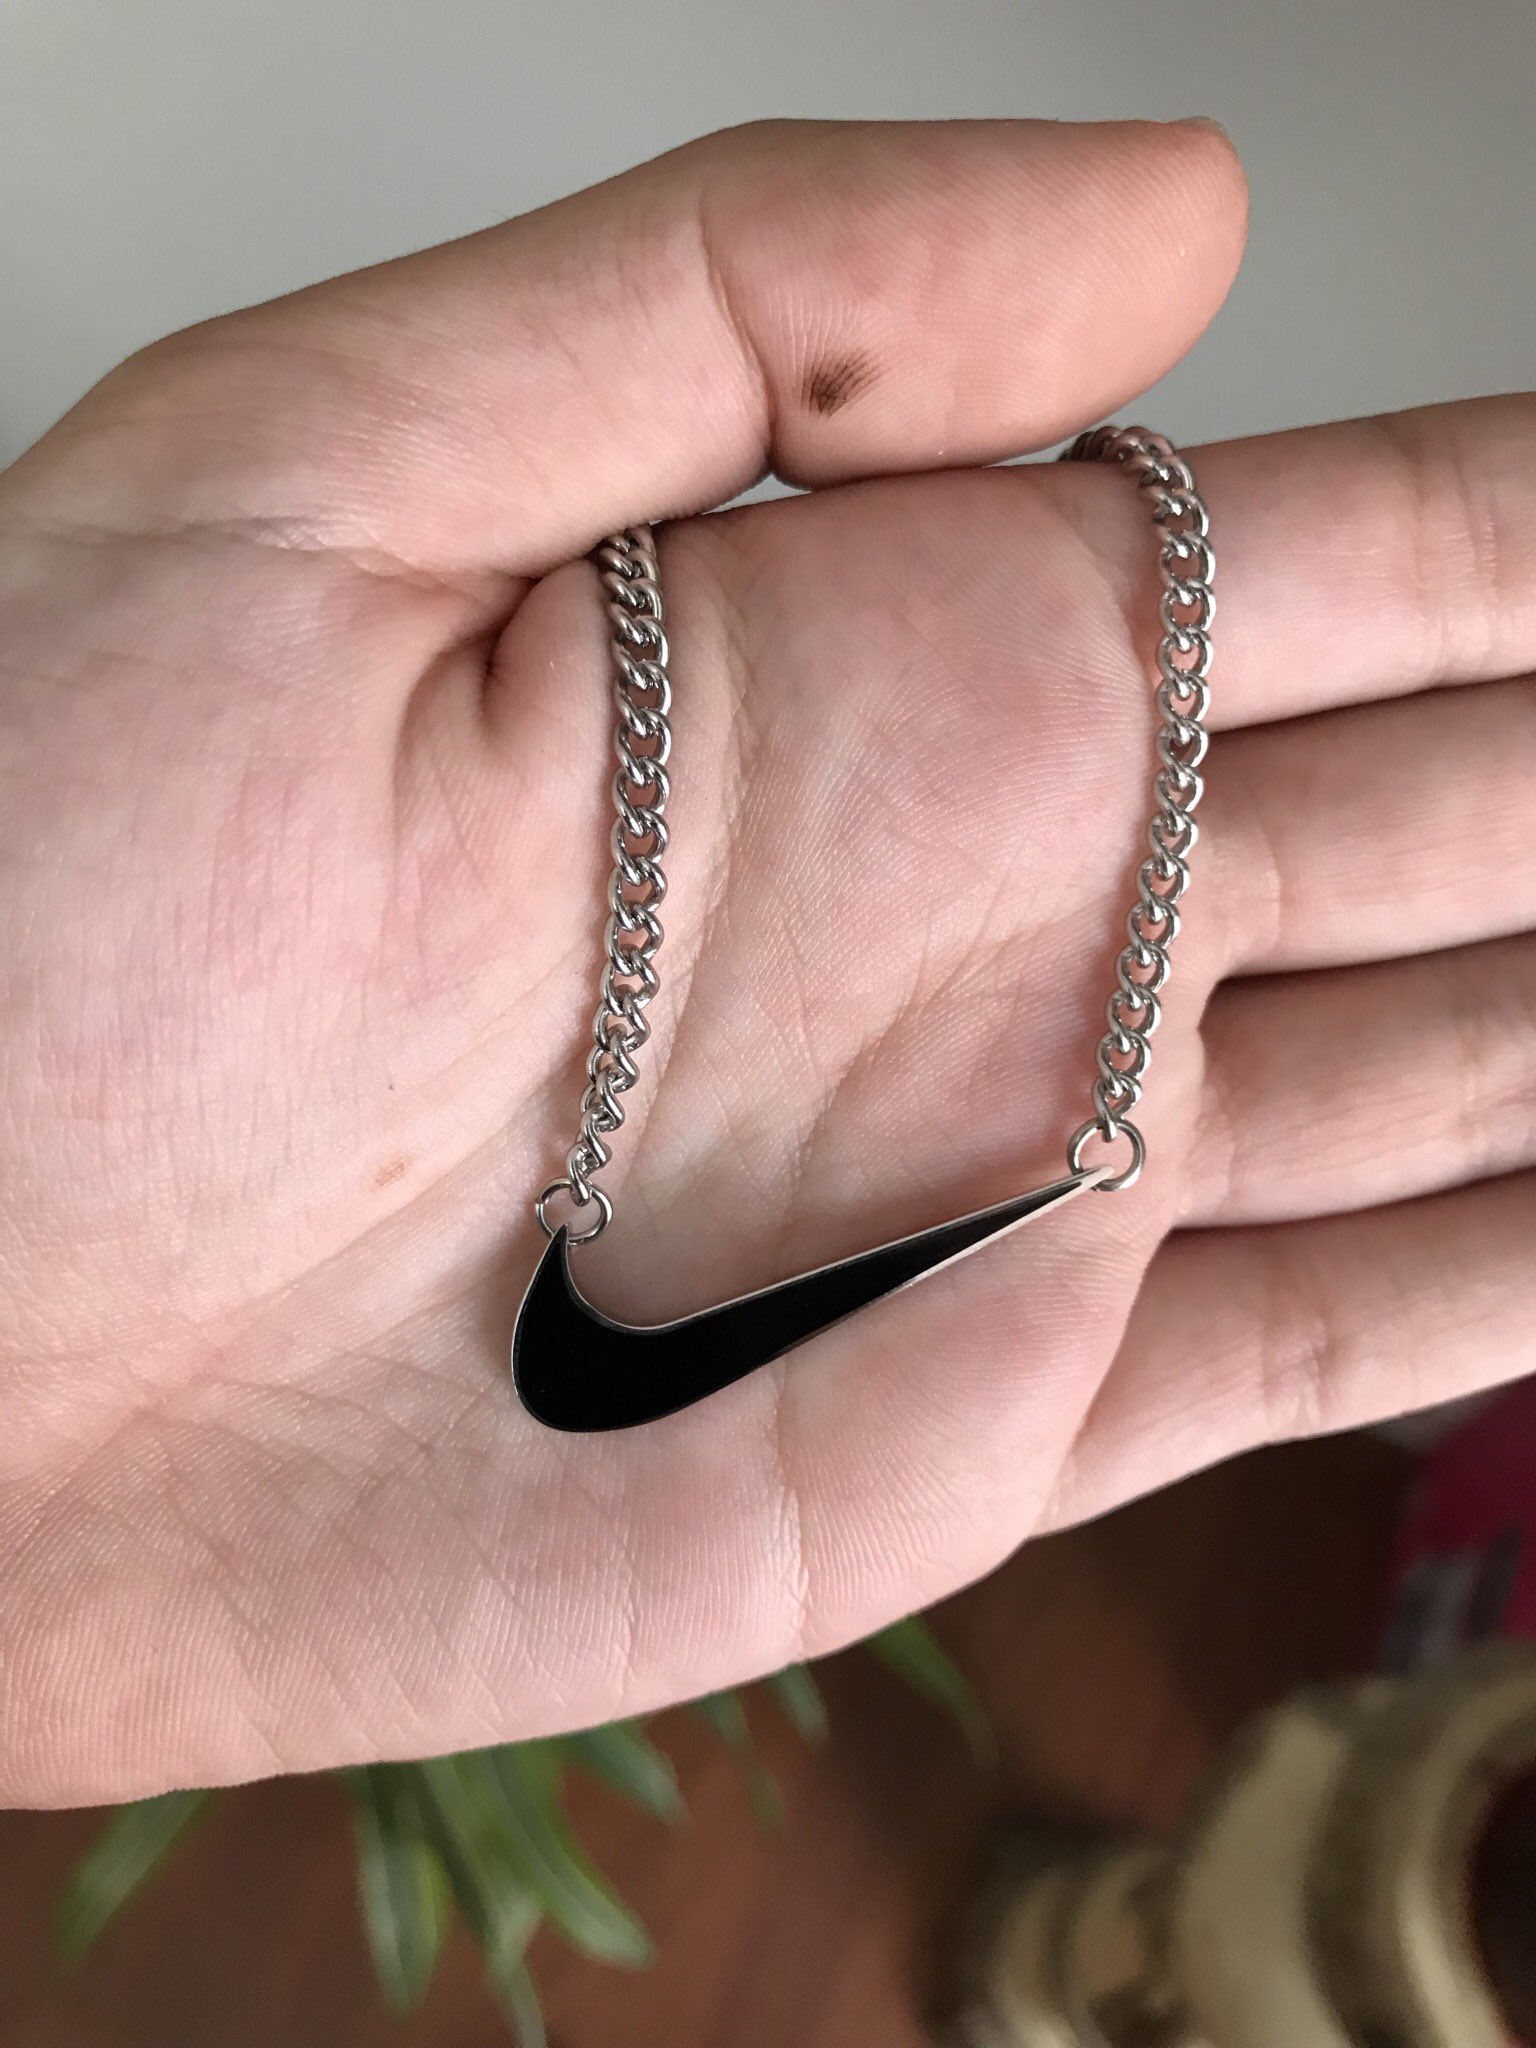 yordy on X: Silver or Gold Nike Necklace Comes with 20” snake